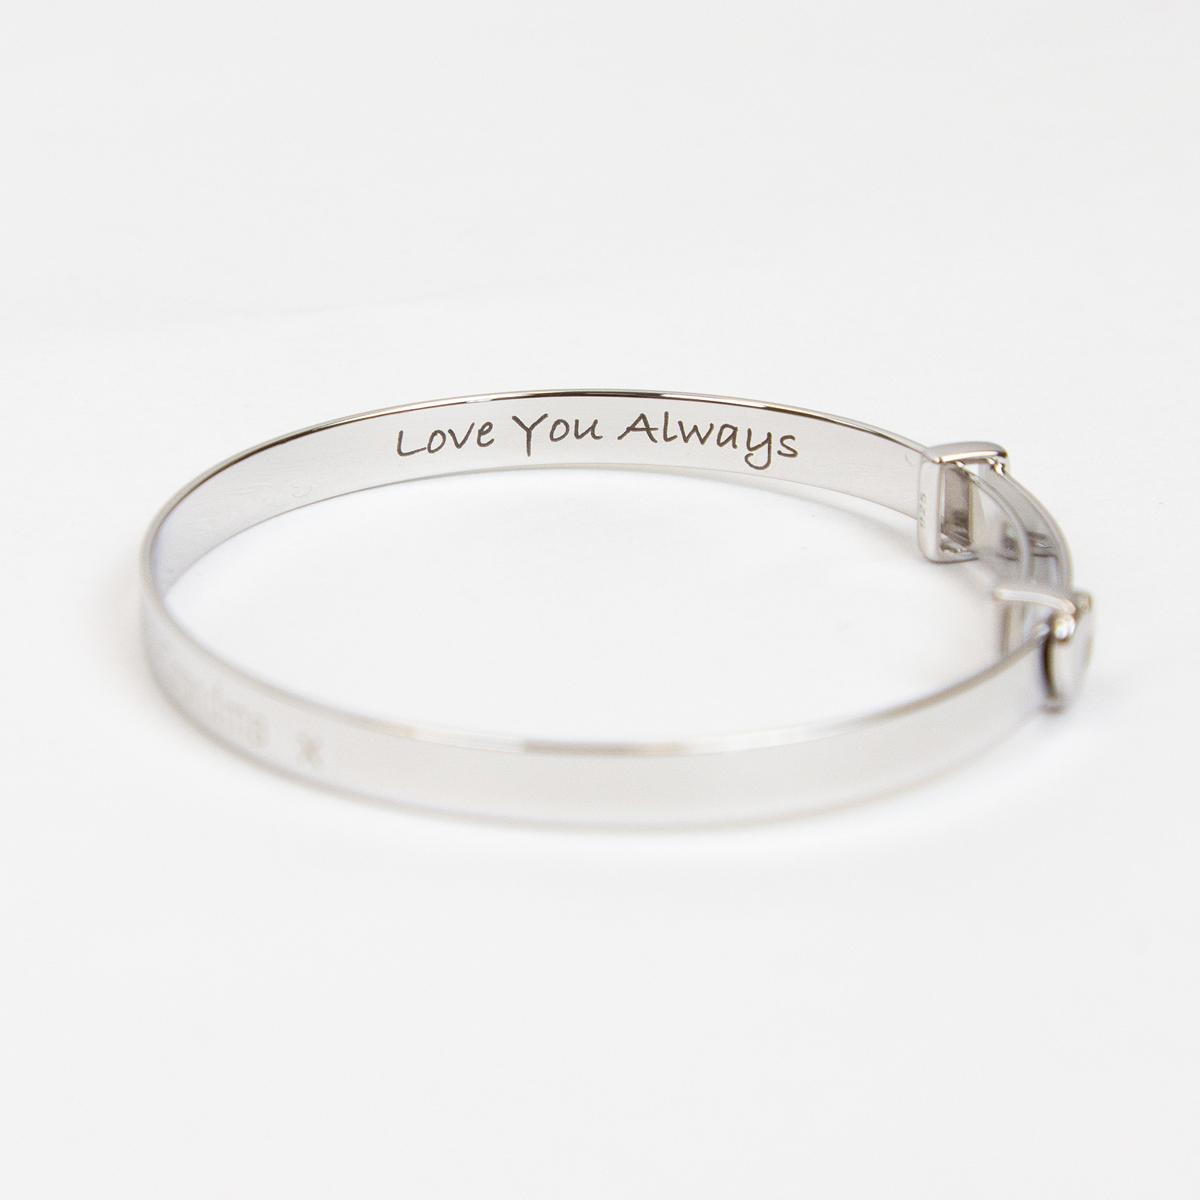 Sterling Silver 'I Do Believe In Fairies' Expandable Bangle With Diamond